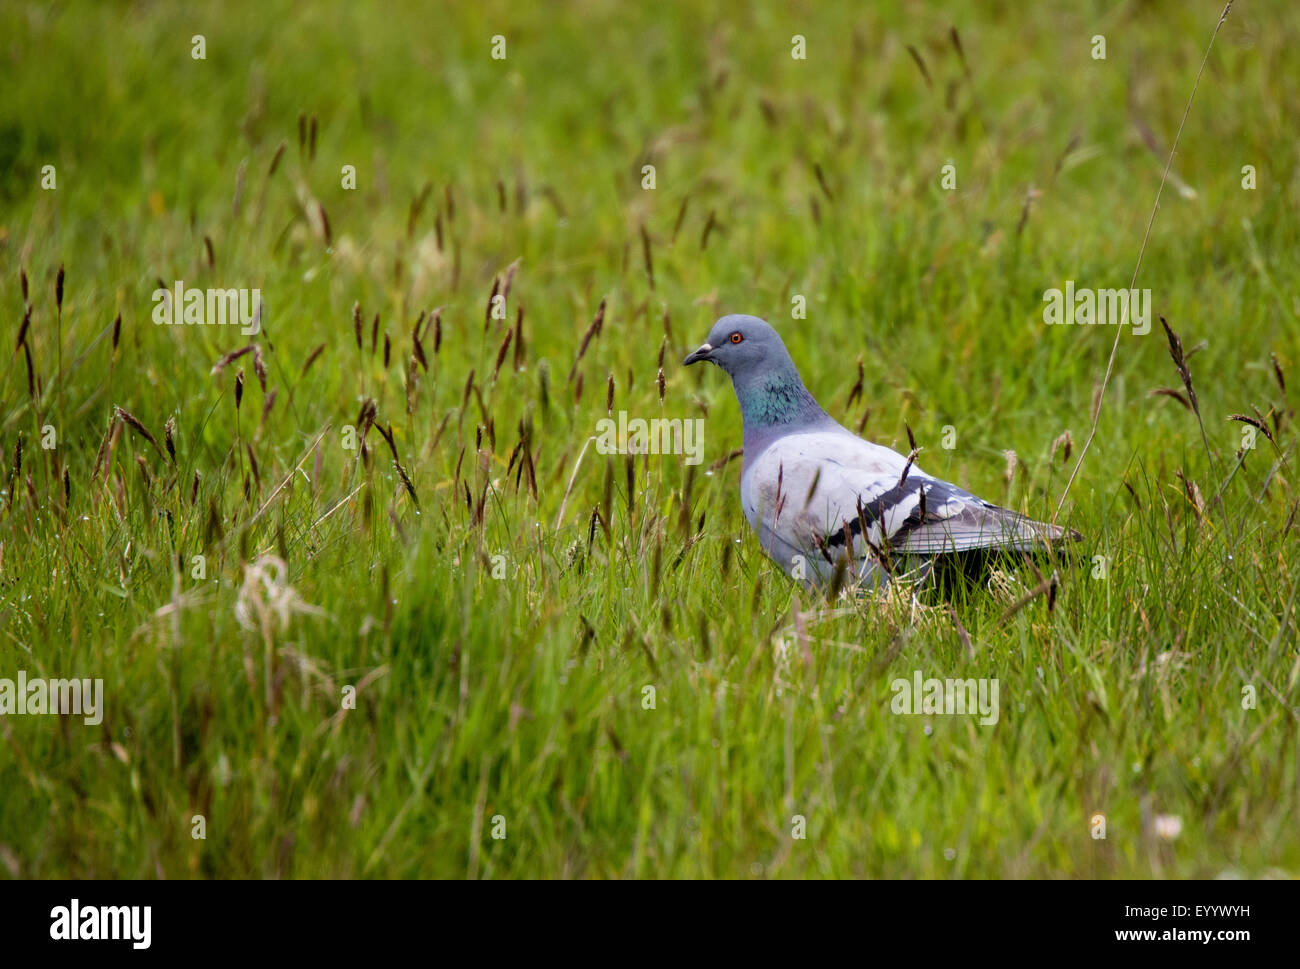 Rock Dove Columba livia adult on ground in grass meadow Stock Photo